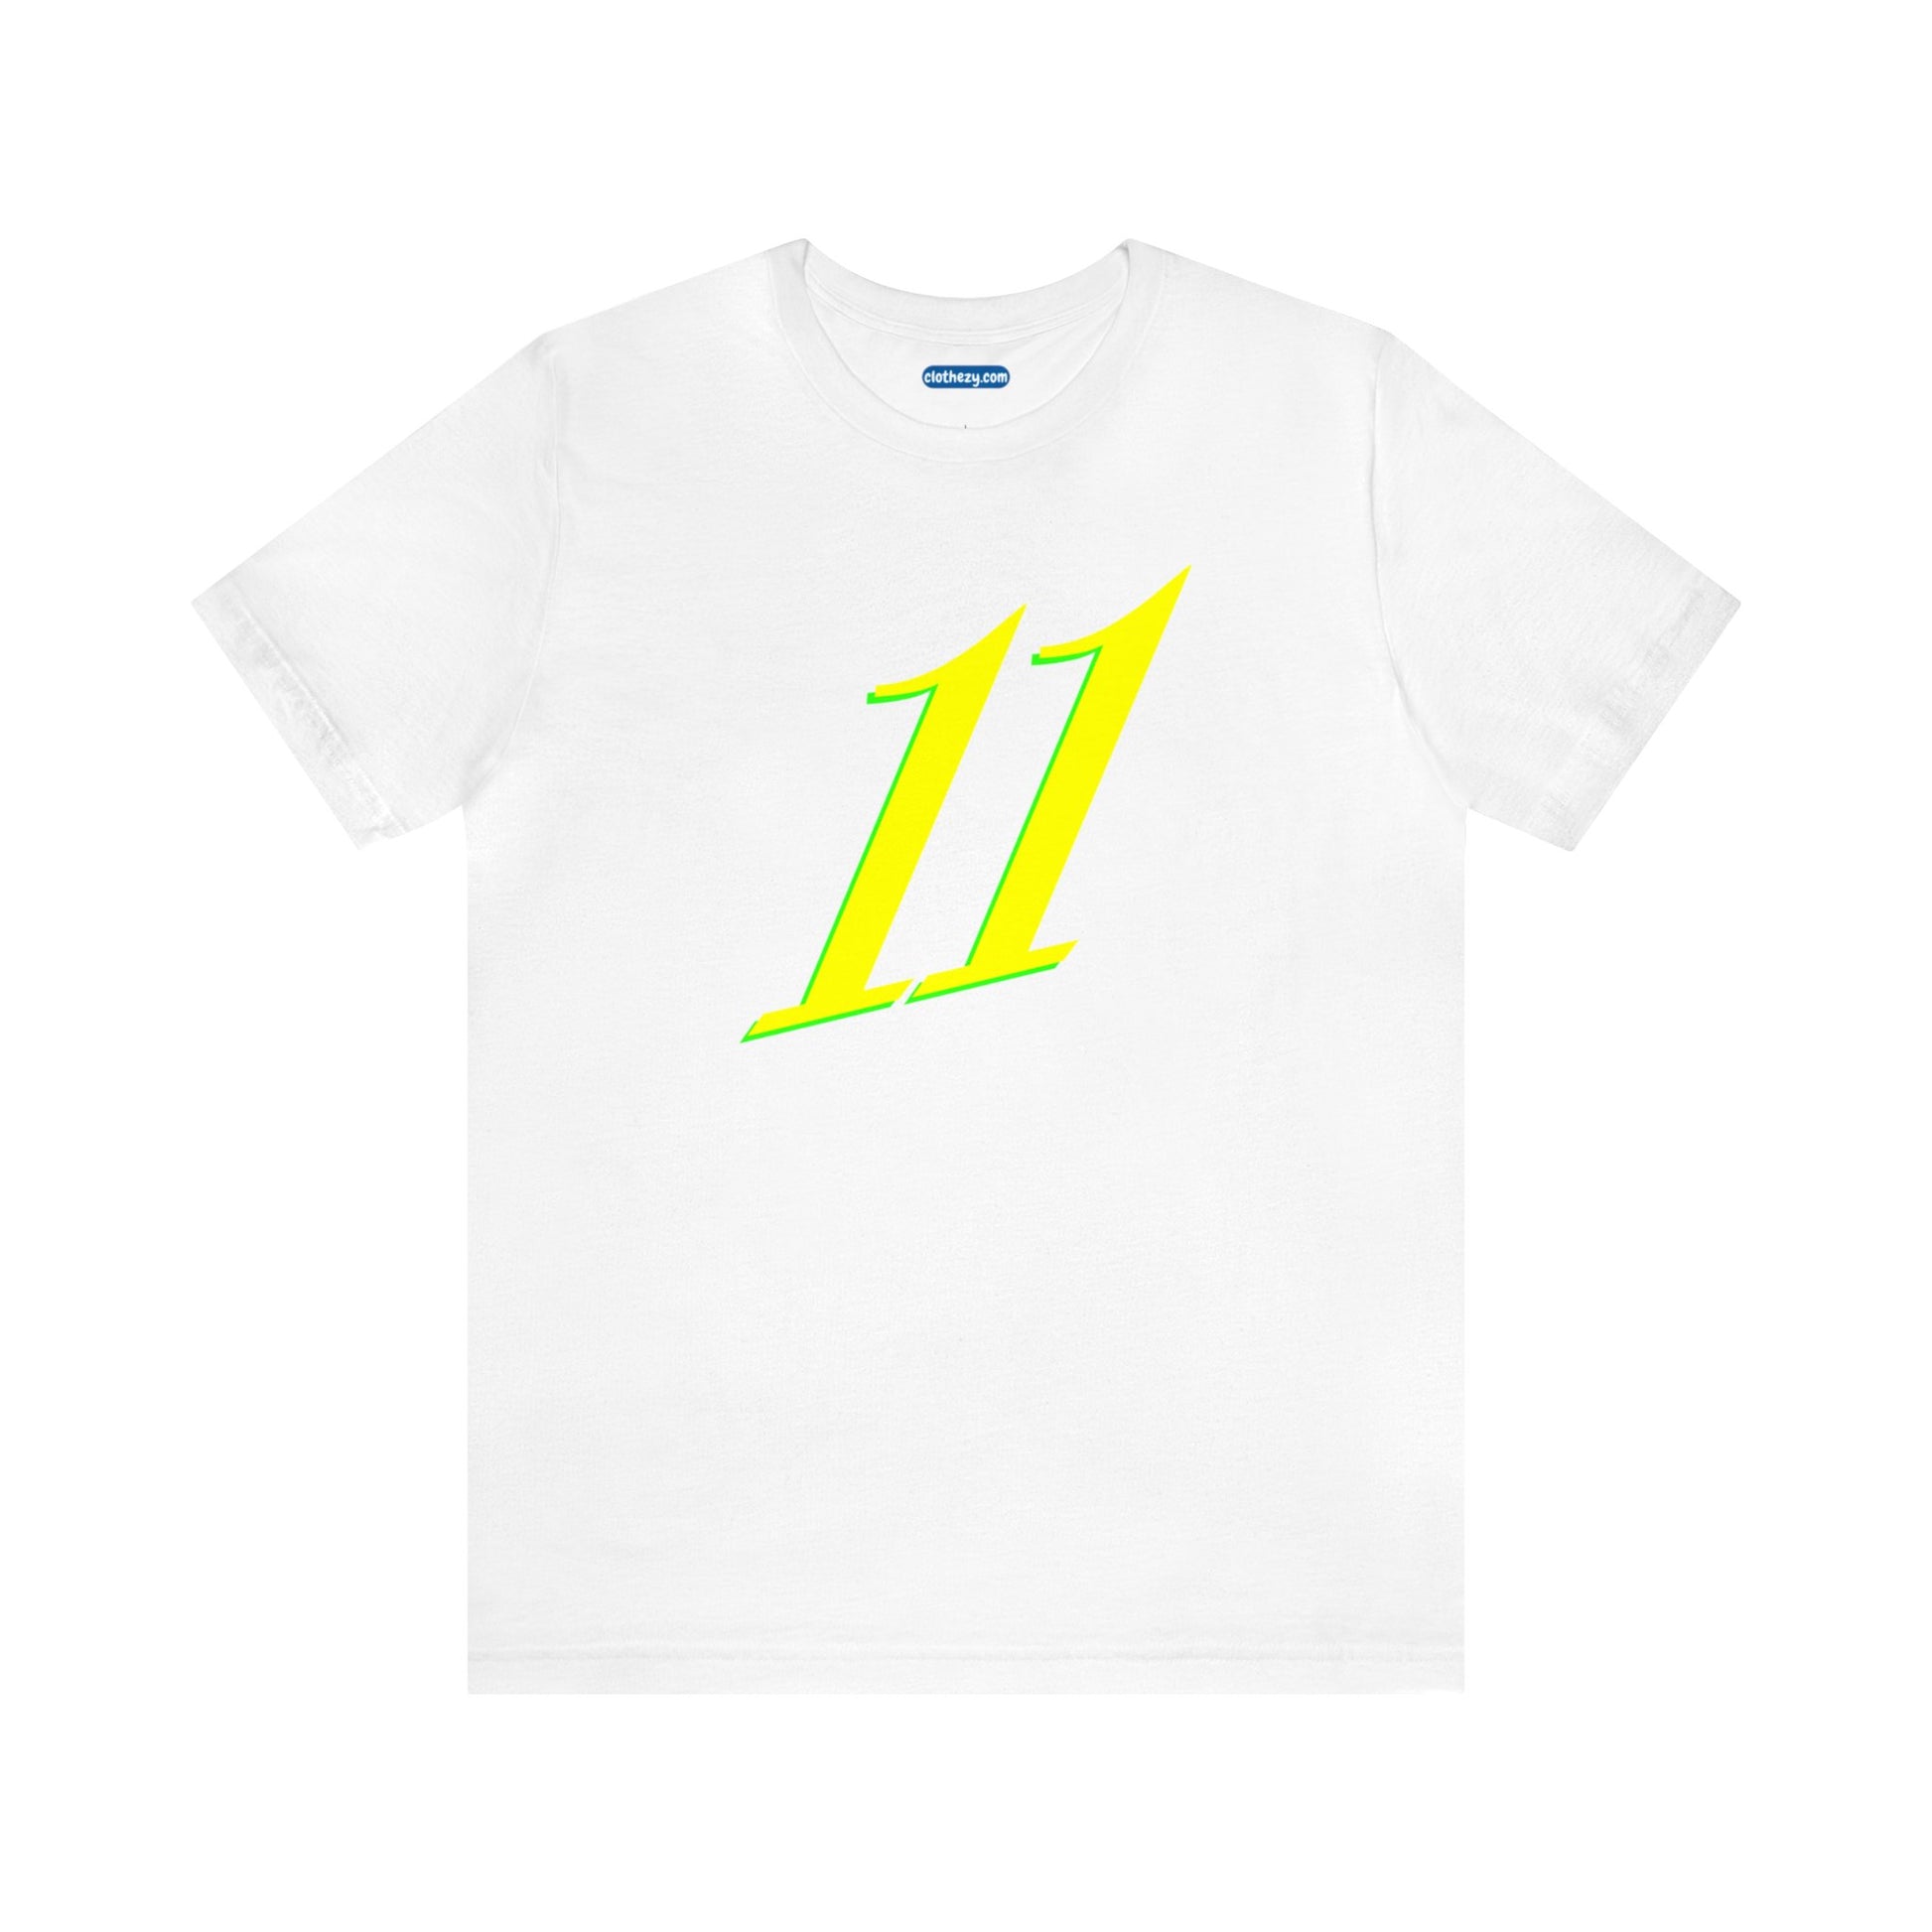 Number 11 Design - Soft Cotton Tee for birthdays and celebrations, Gift for friends and family, Multiple Options by clothezy.com in White Size Small - Buy Now